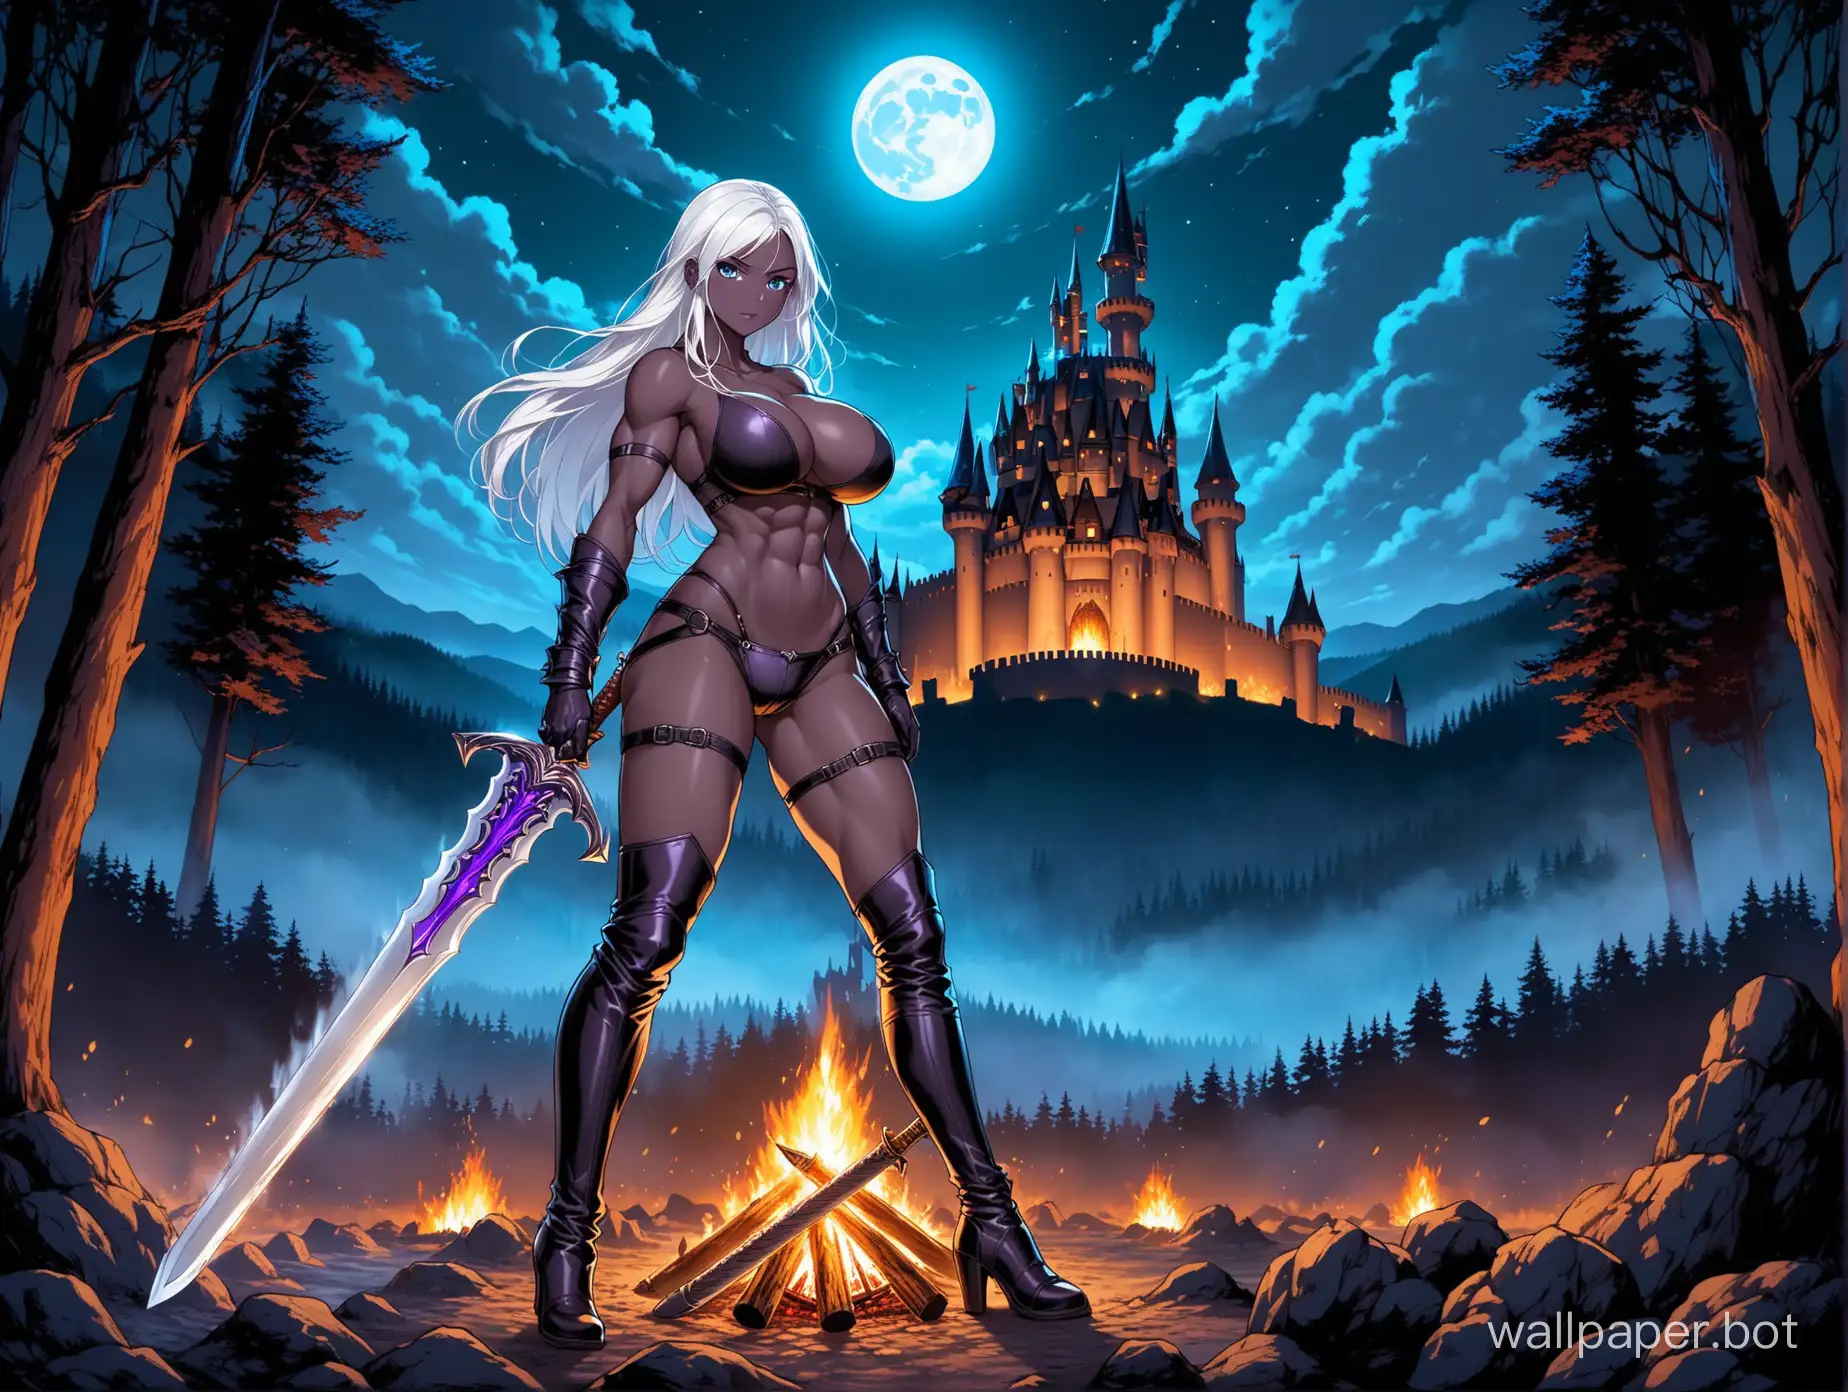 Woman, one, thin, muscular, young, beautiful face, dark purple skin, long white hair, big breasts, blue eyes, leather underwear and gloves, long boots, fishnets, holding a colossal sword, the sword is as tall as she is, forest, bonfire, night, castle far in the background, long shot, full body, moon,